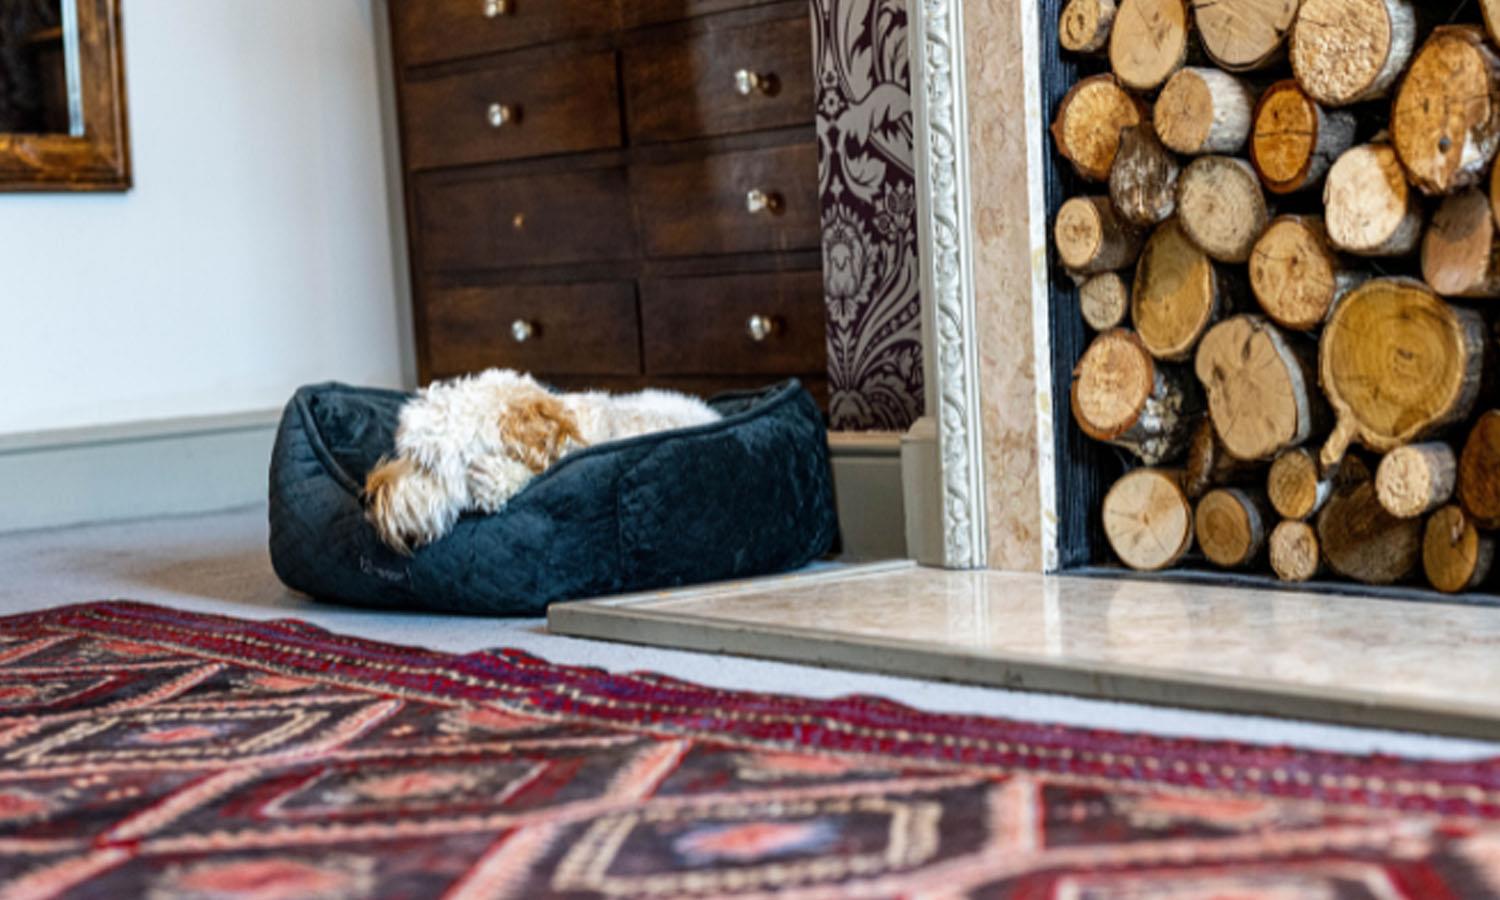 There's always a cosy spot for your pooch to bed down in